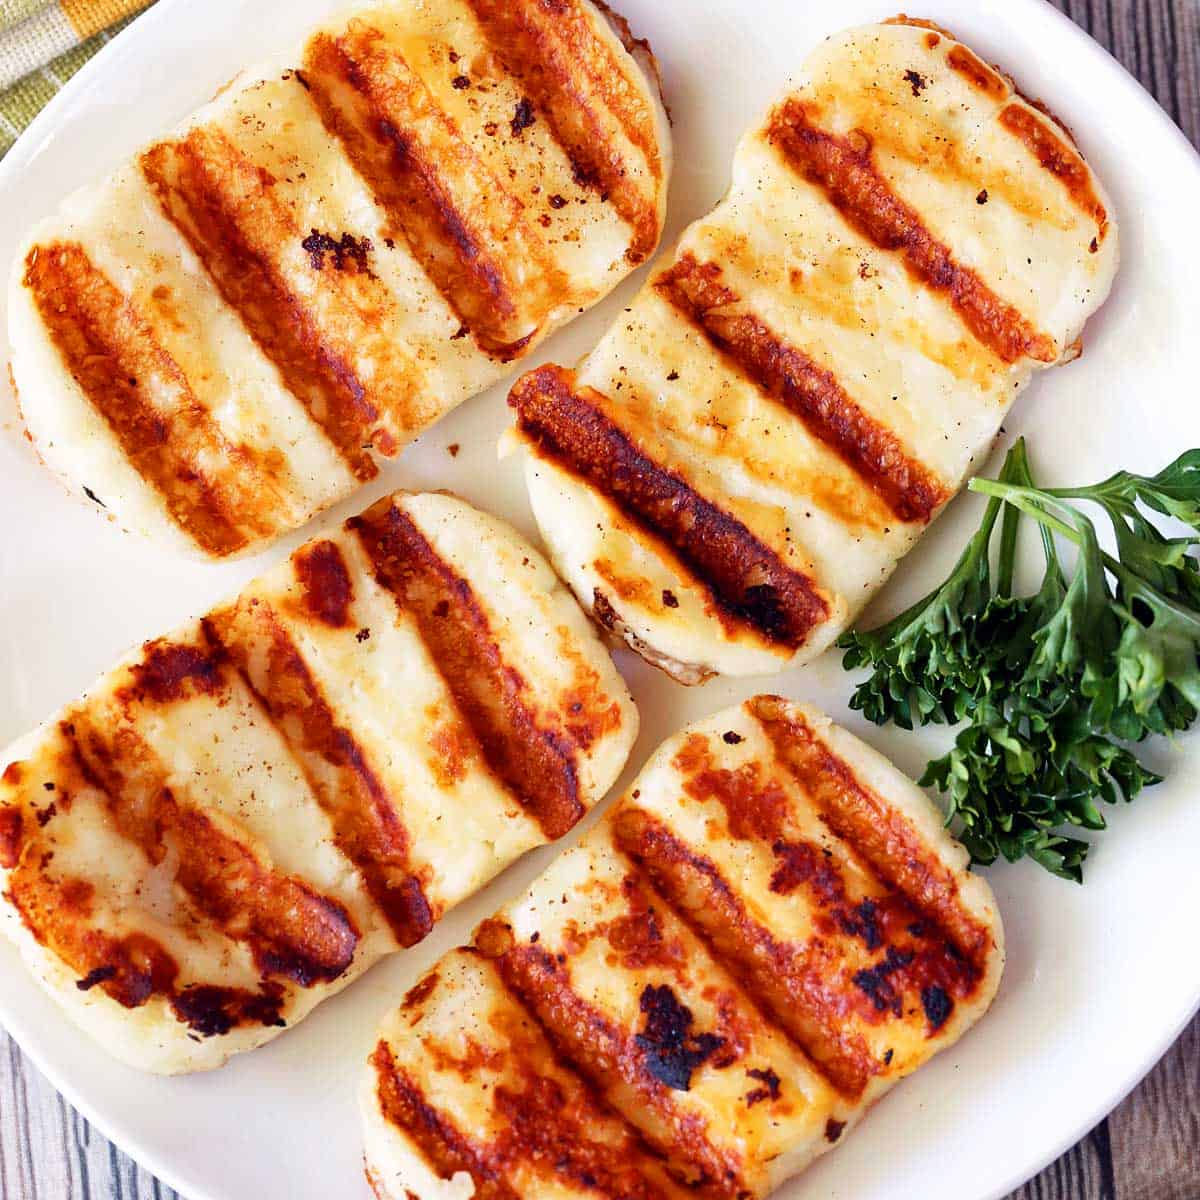 Grilled halloumi cheese served on a white plate.